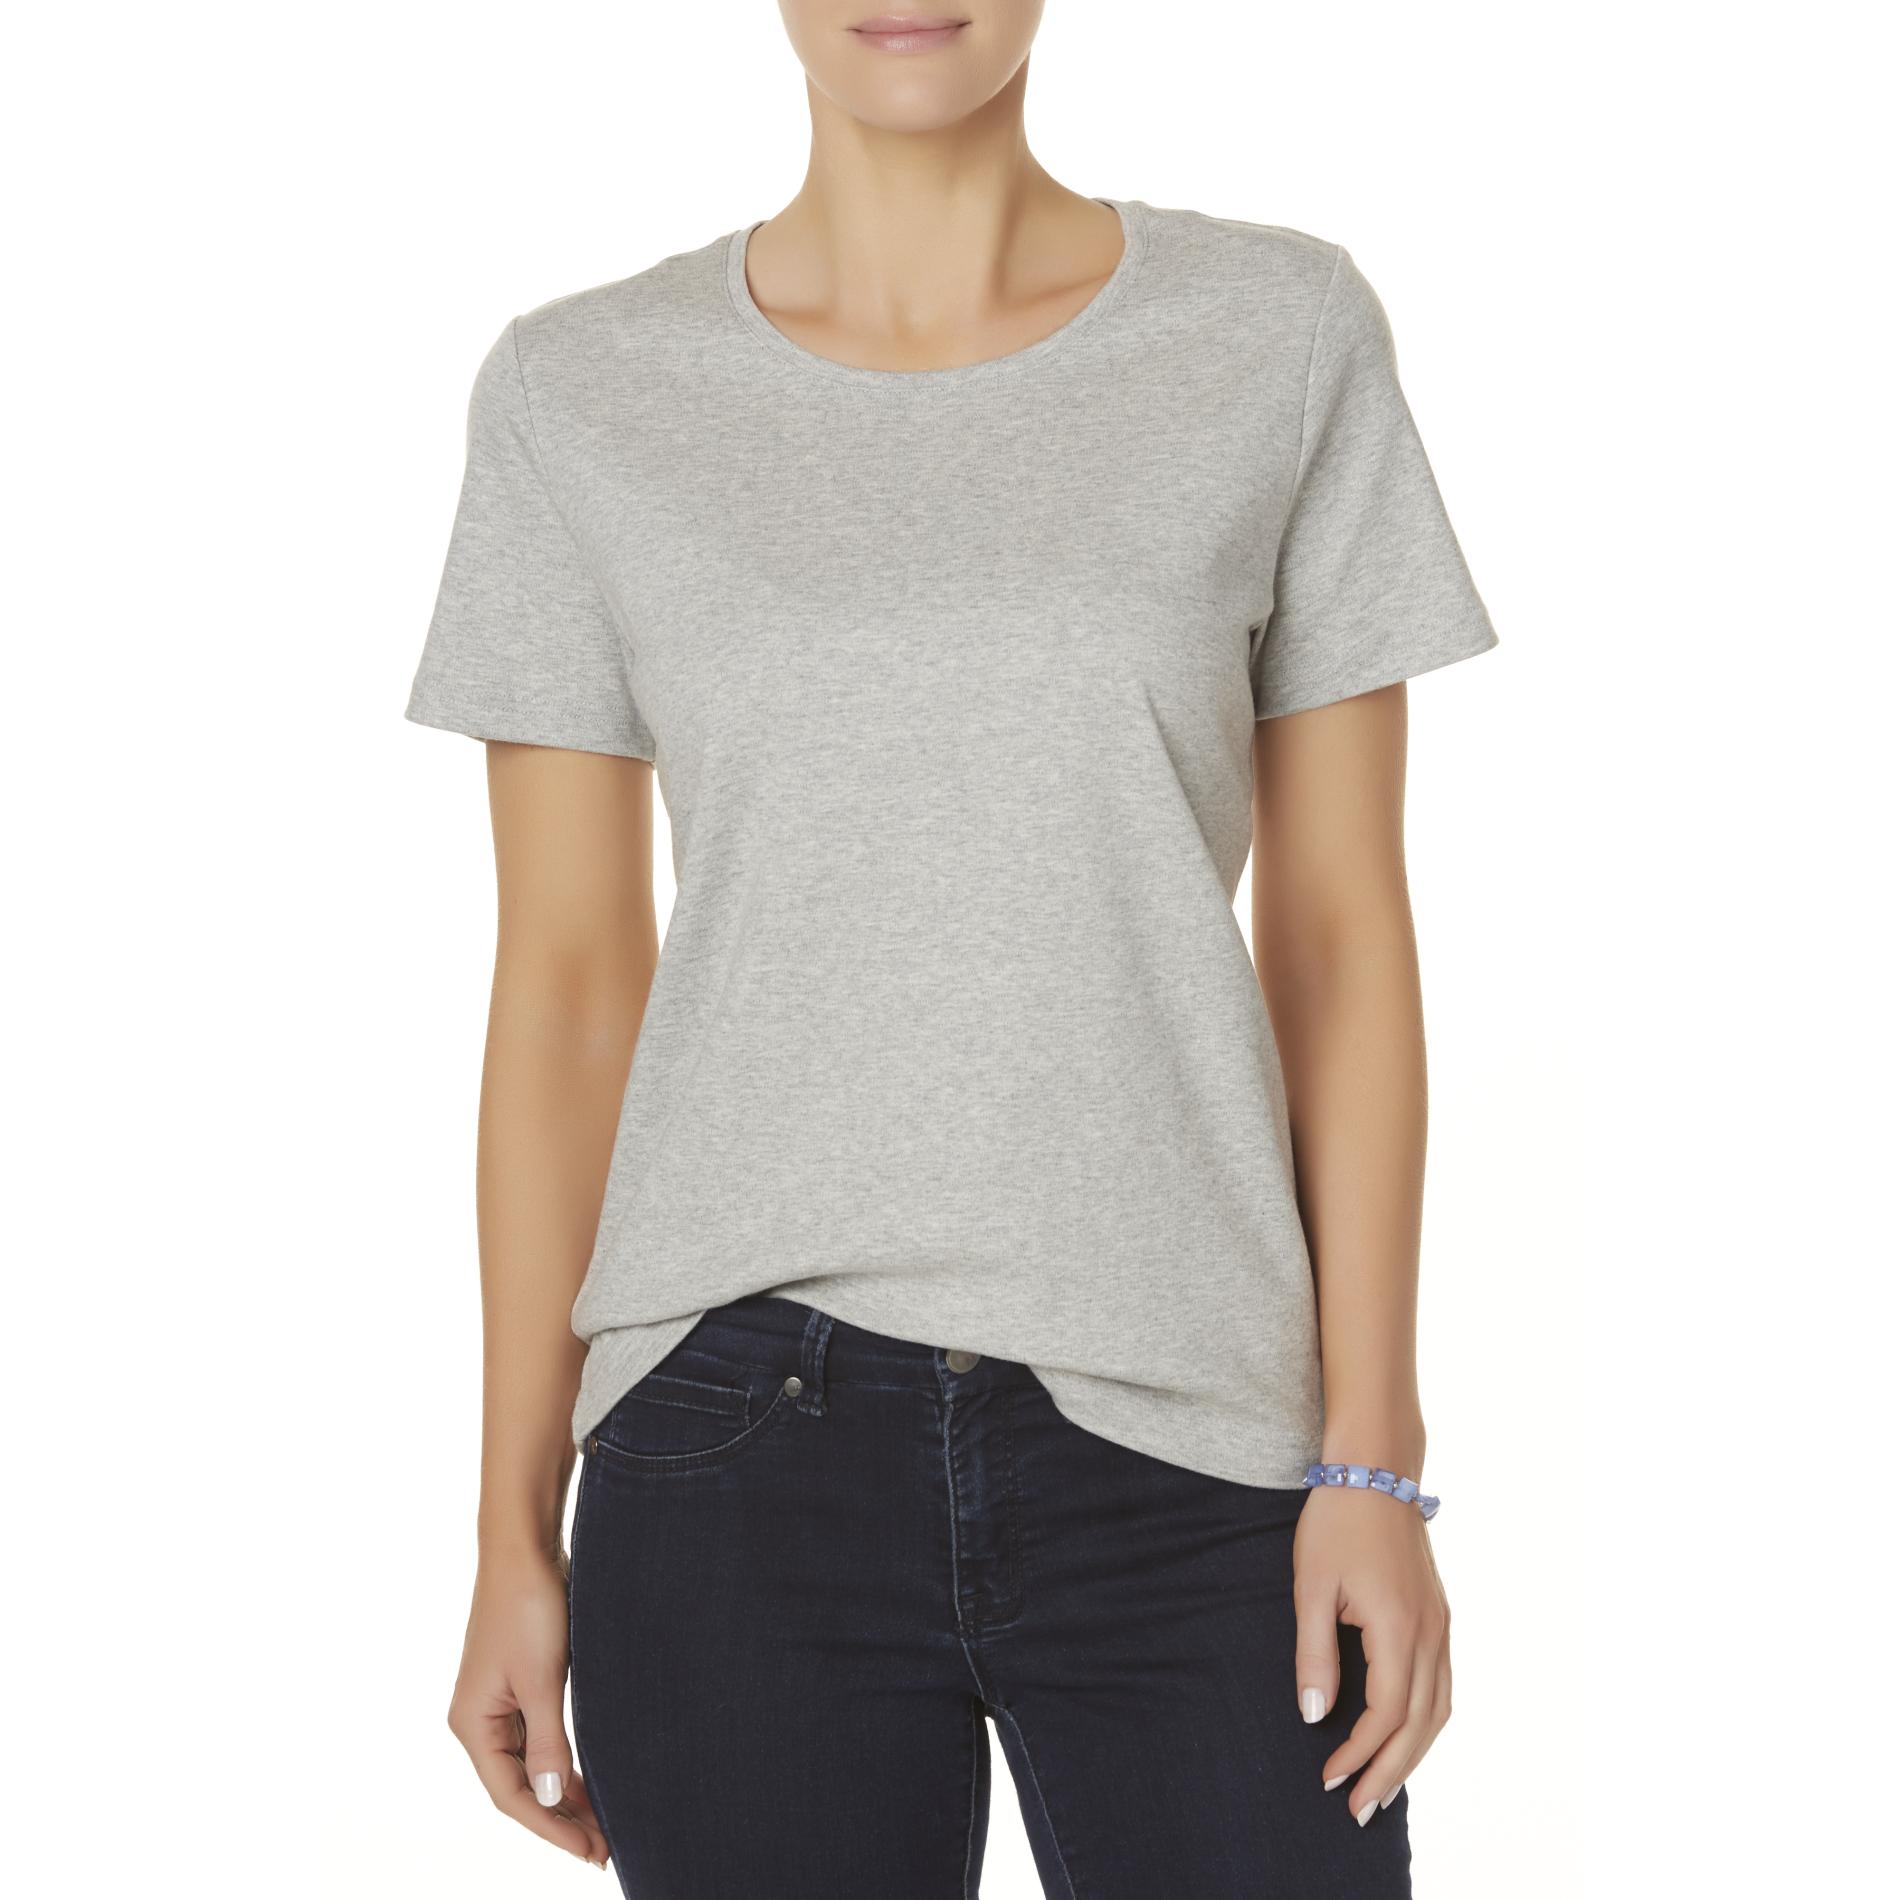 Basic Editions Women's Relaxed Fit Top - Heathered